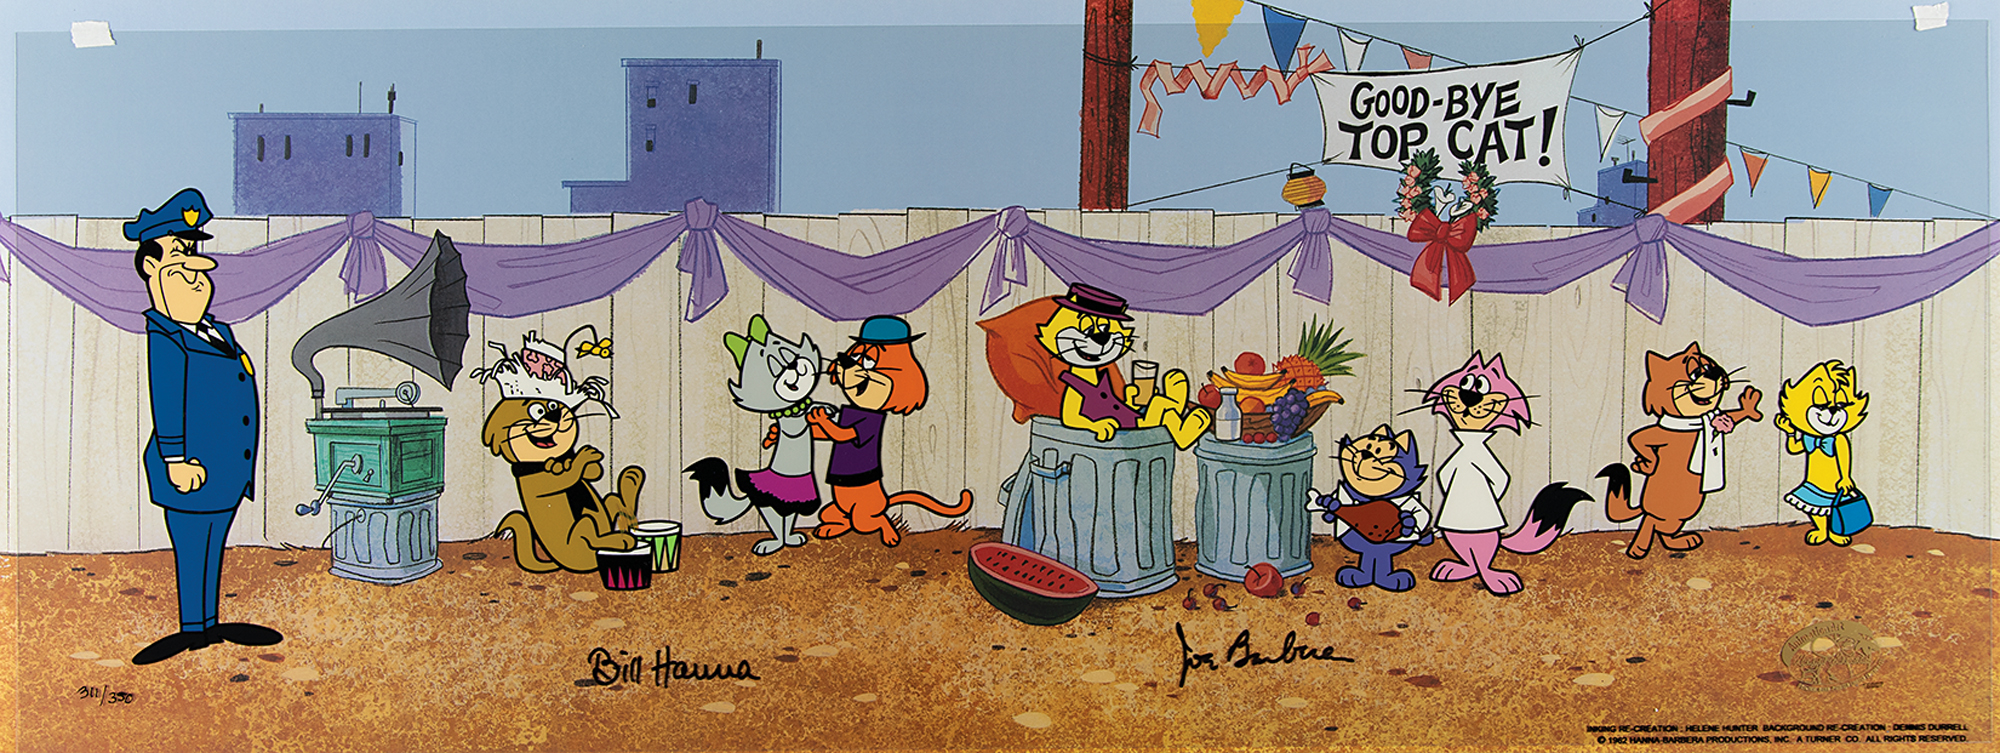 Lot #854 Top Cat limited edition cel signed by Bill Hanna and Joe Barbera